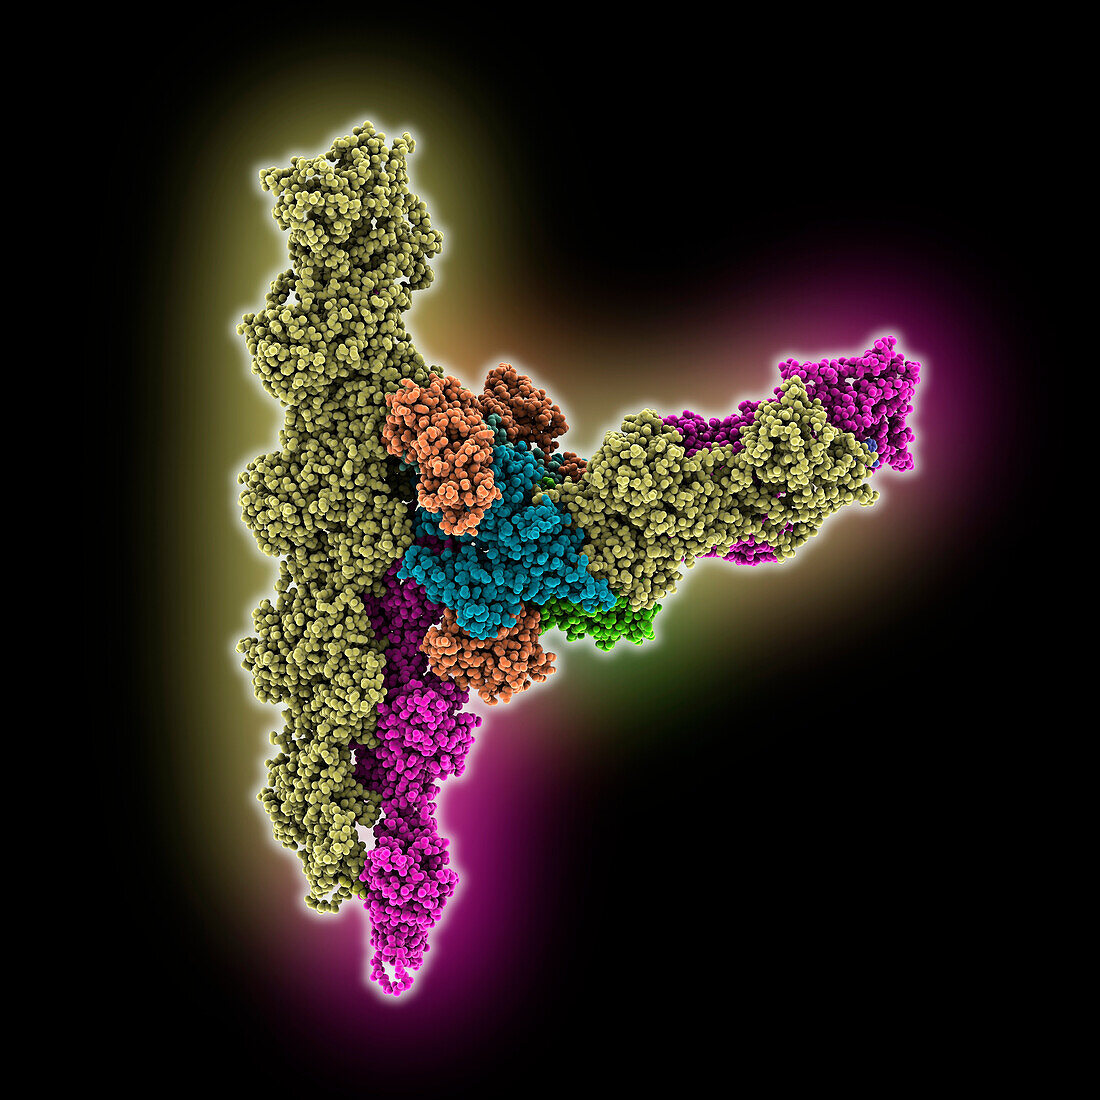 Arp2/3 complex at branched-actin junction, molecular model